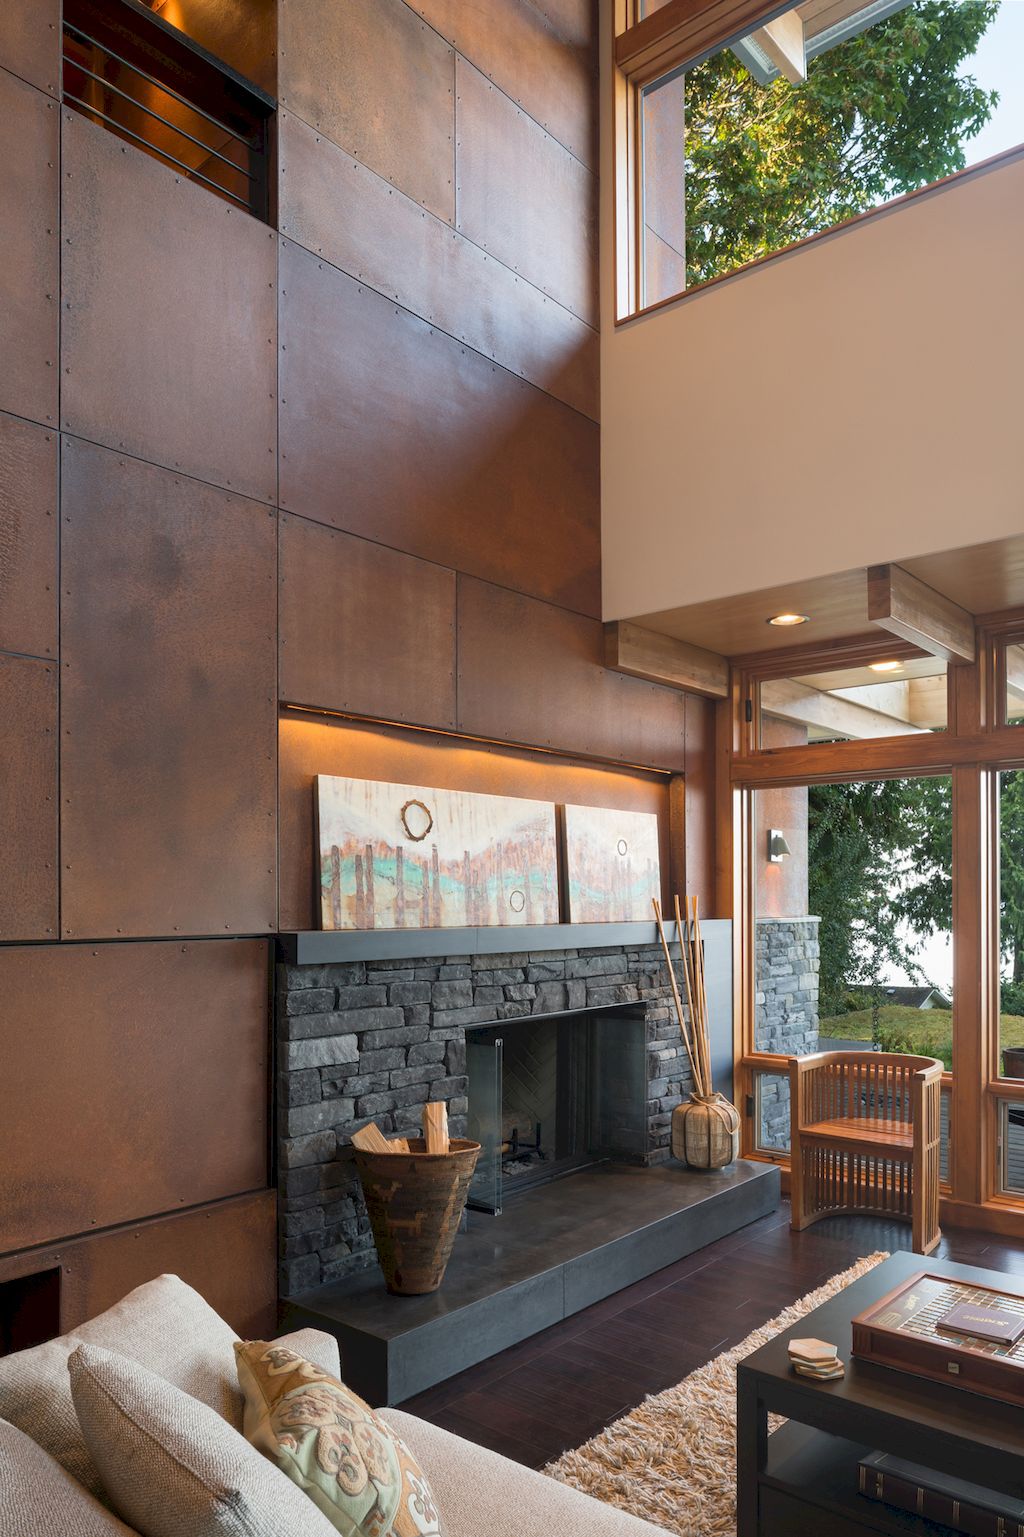 Island Retreat Features Pacific Northwest-style House by Coates Design